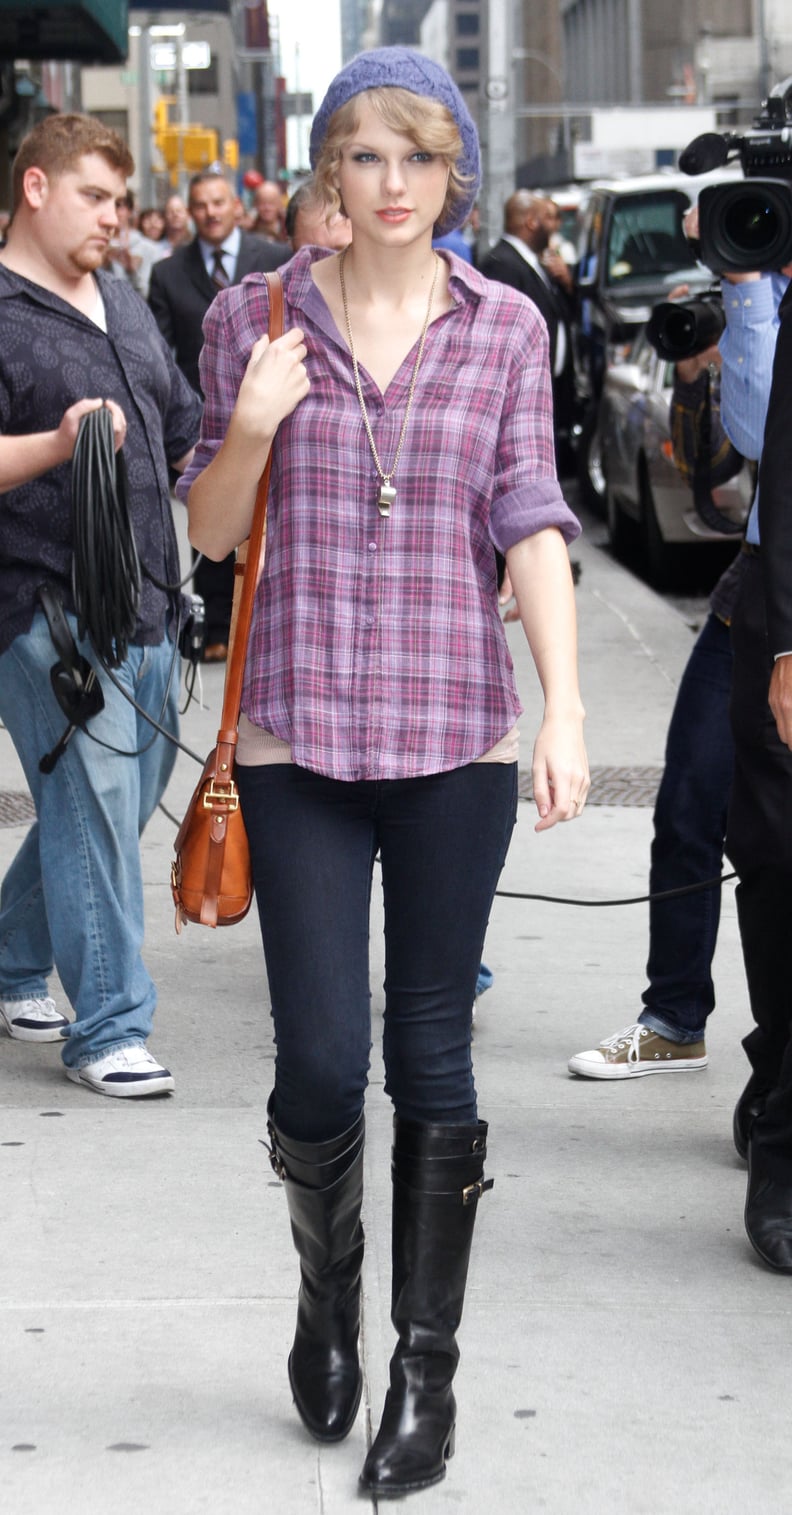 Taylor Tried Jeans With a Plaid Button-Down and Sleek Buckled Boots